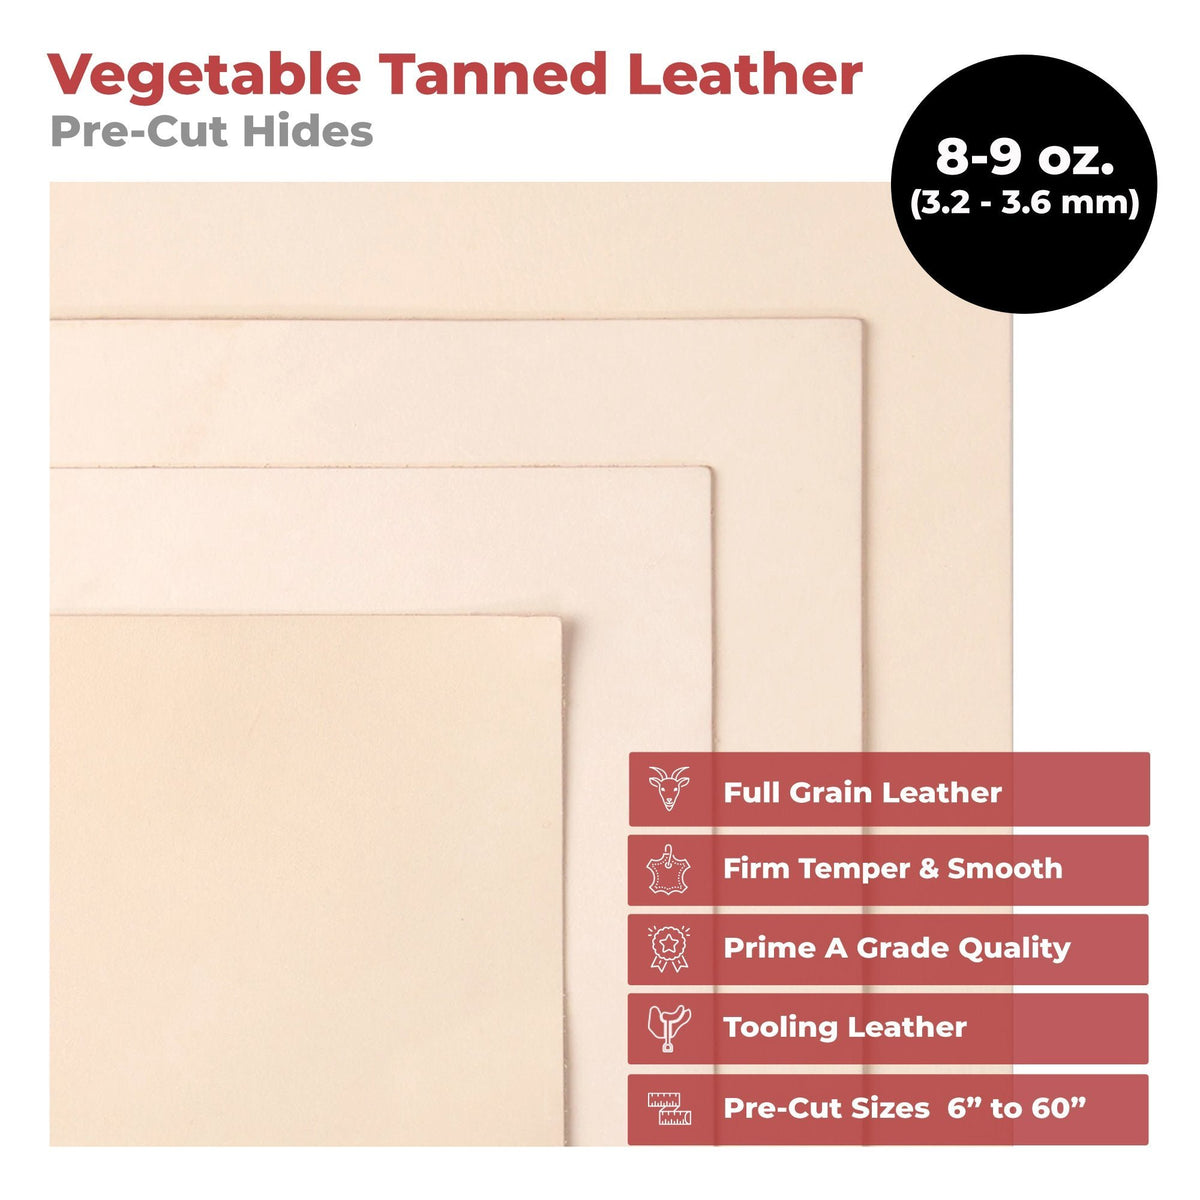 European Leather Work 9-10 oz. 3.6-4 mm Size: 1x72 Vegetable Tanned  Cowhide Full Grain Import Tooling Leather Belt Blanks, Straps/Strip for DIY  